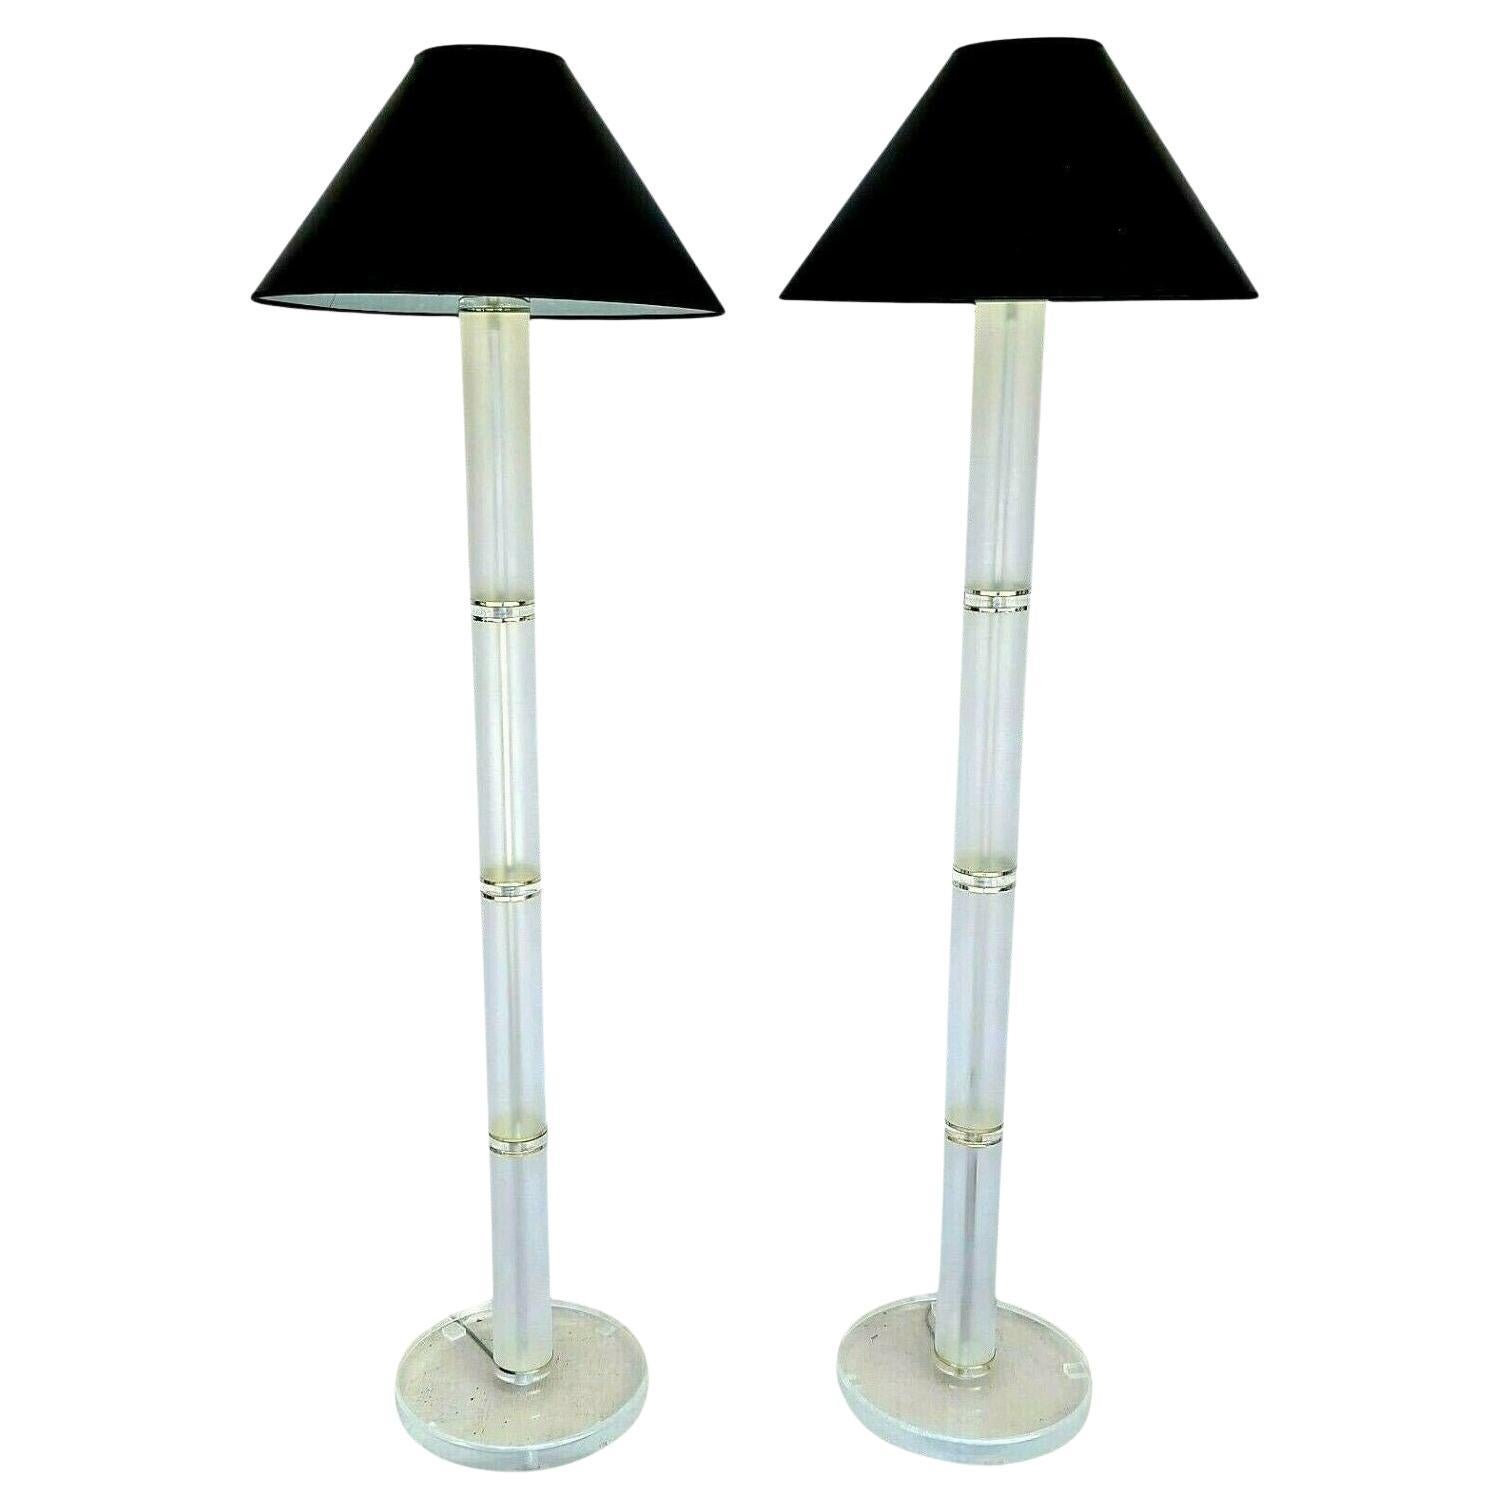 1970s Mid-Century Modern Optique Style Lucite & Brass Floor Lamps, a Pair